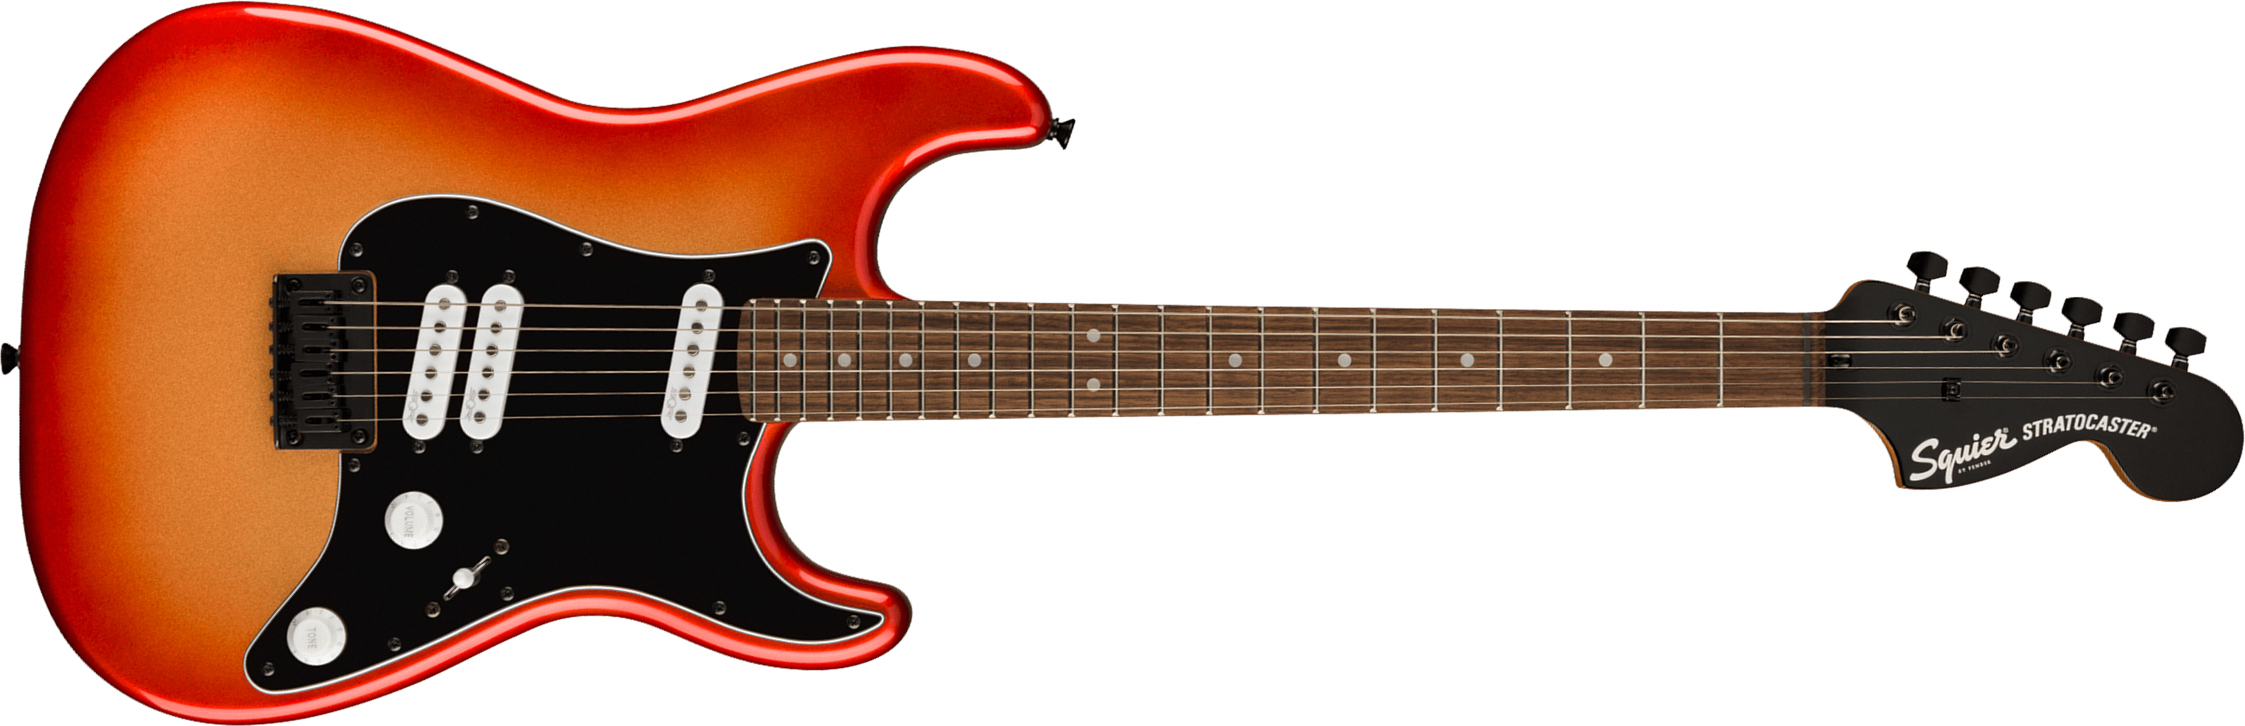 Squier Strat Contemporary Special Ht Sss Lau - Sunset Metallic - Str shape electric guitar - Main picture